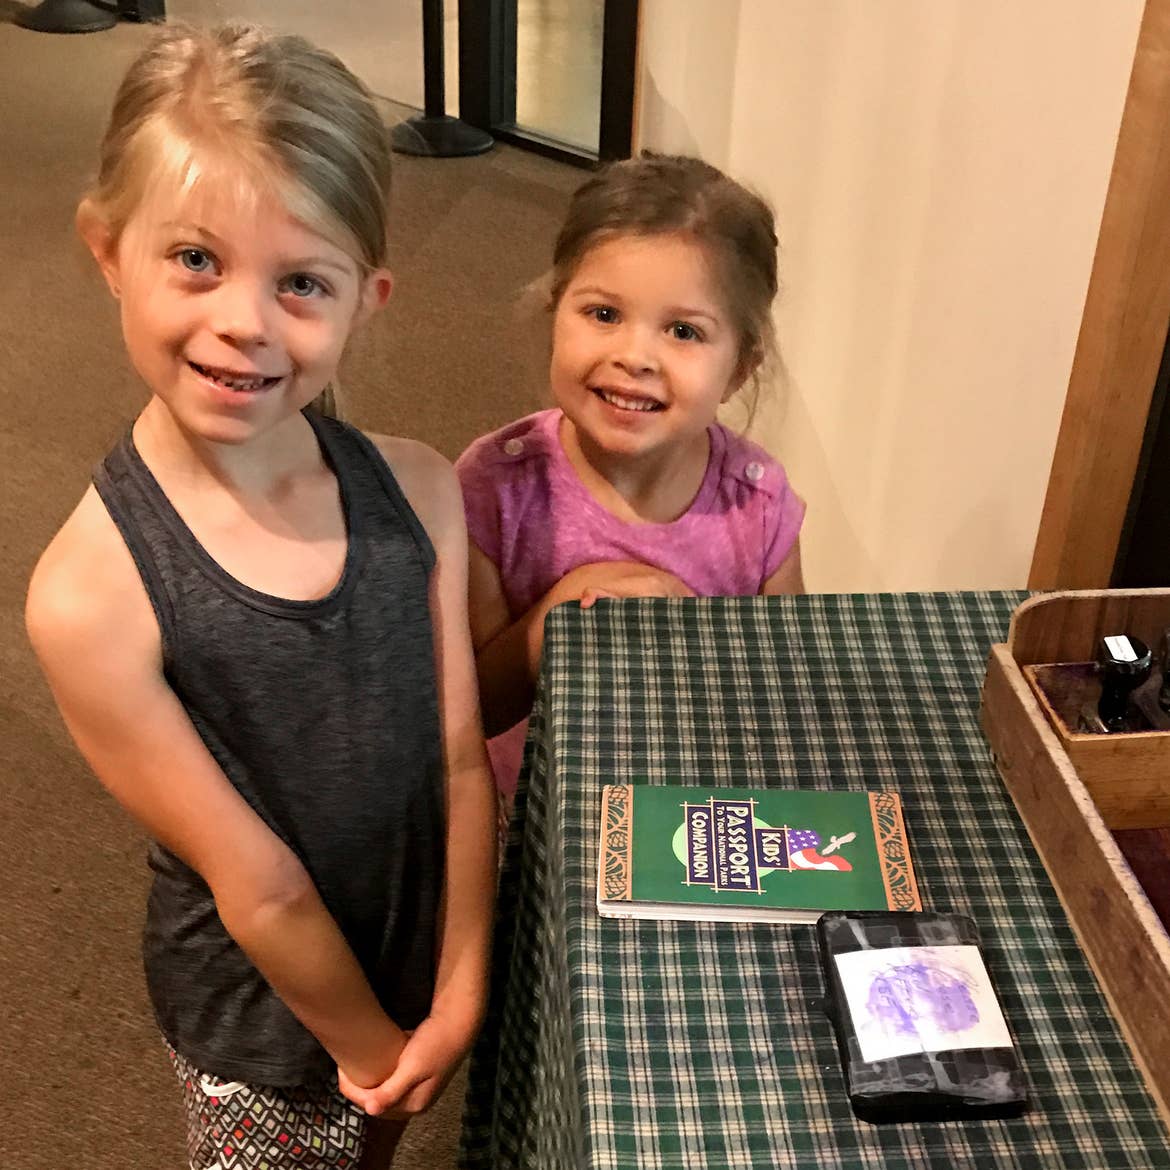 Author, Chris Johnstons' daughters, Kyndall (left), and Kyler (right) pose with their Passport stamp booklet.